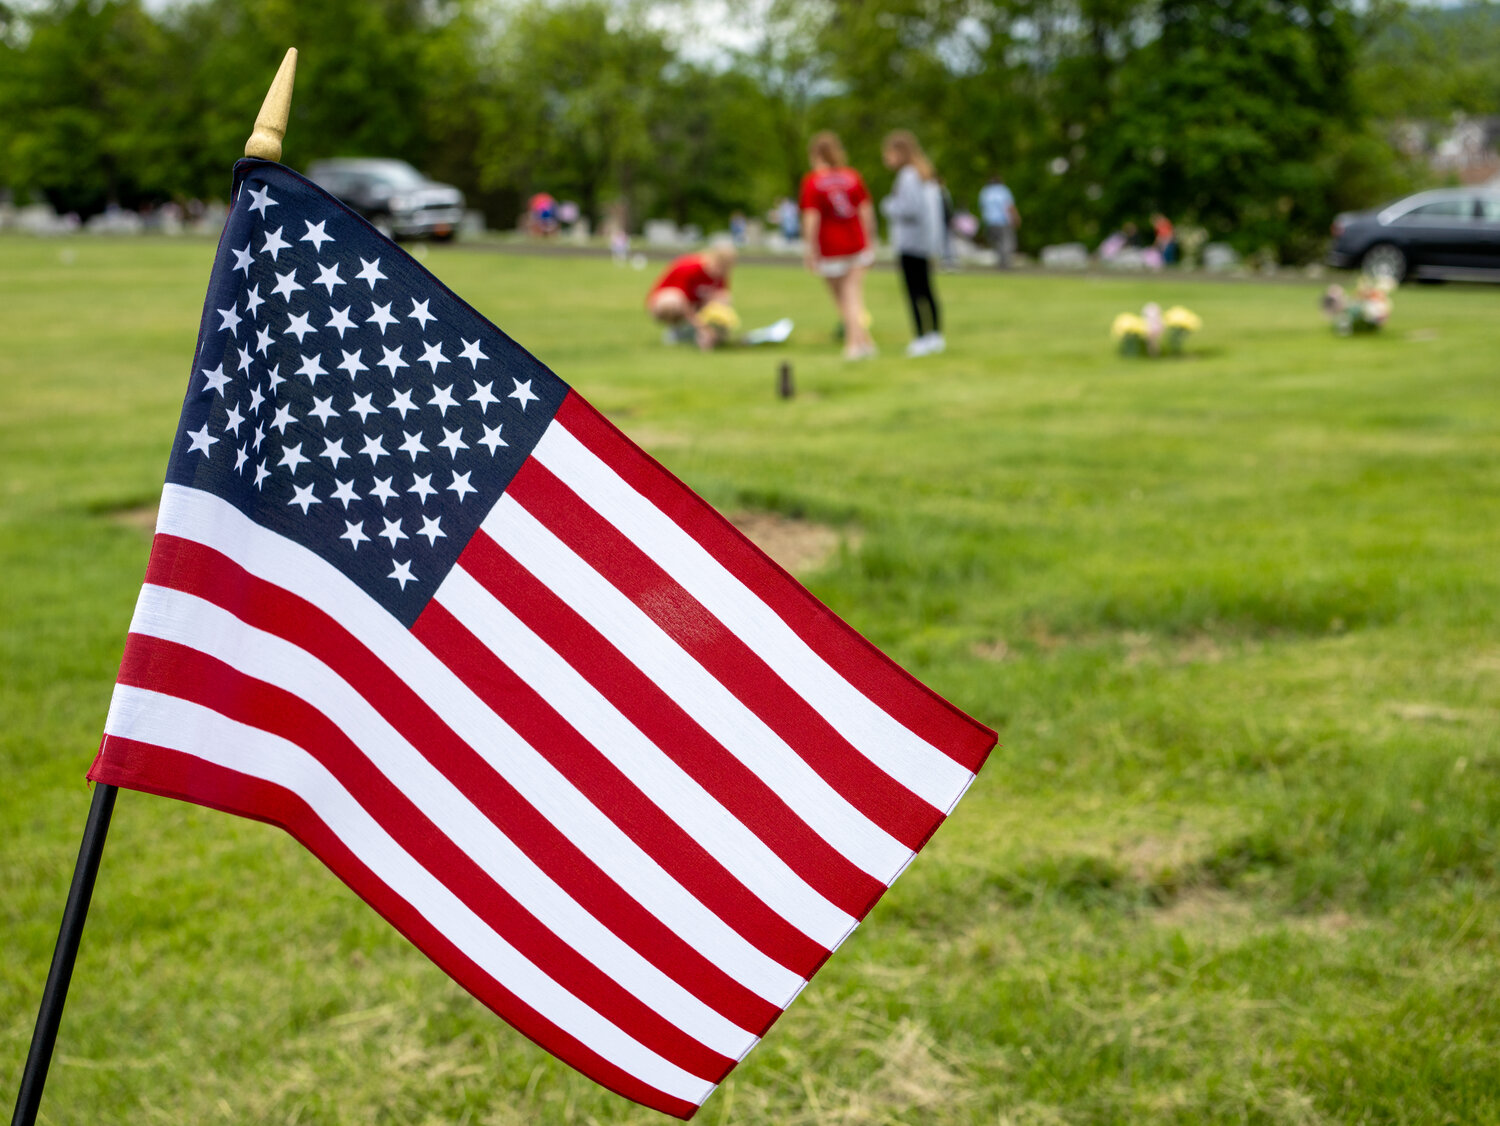 Middle school students in the Pennridge School District did their part to make sure those visiting local cemeteries “never forget” veterans’ contributions and sacrifices.